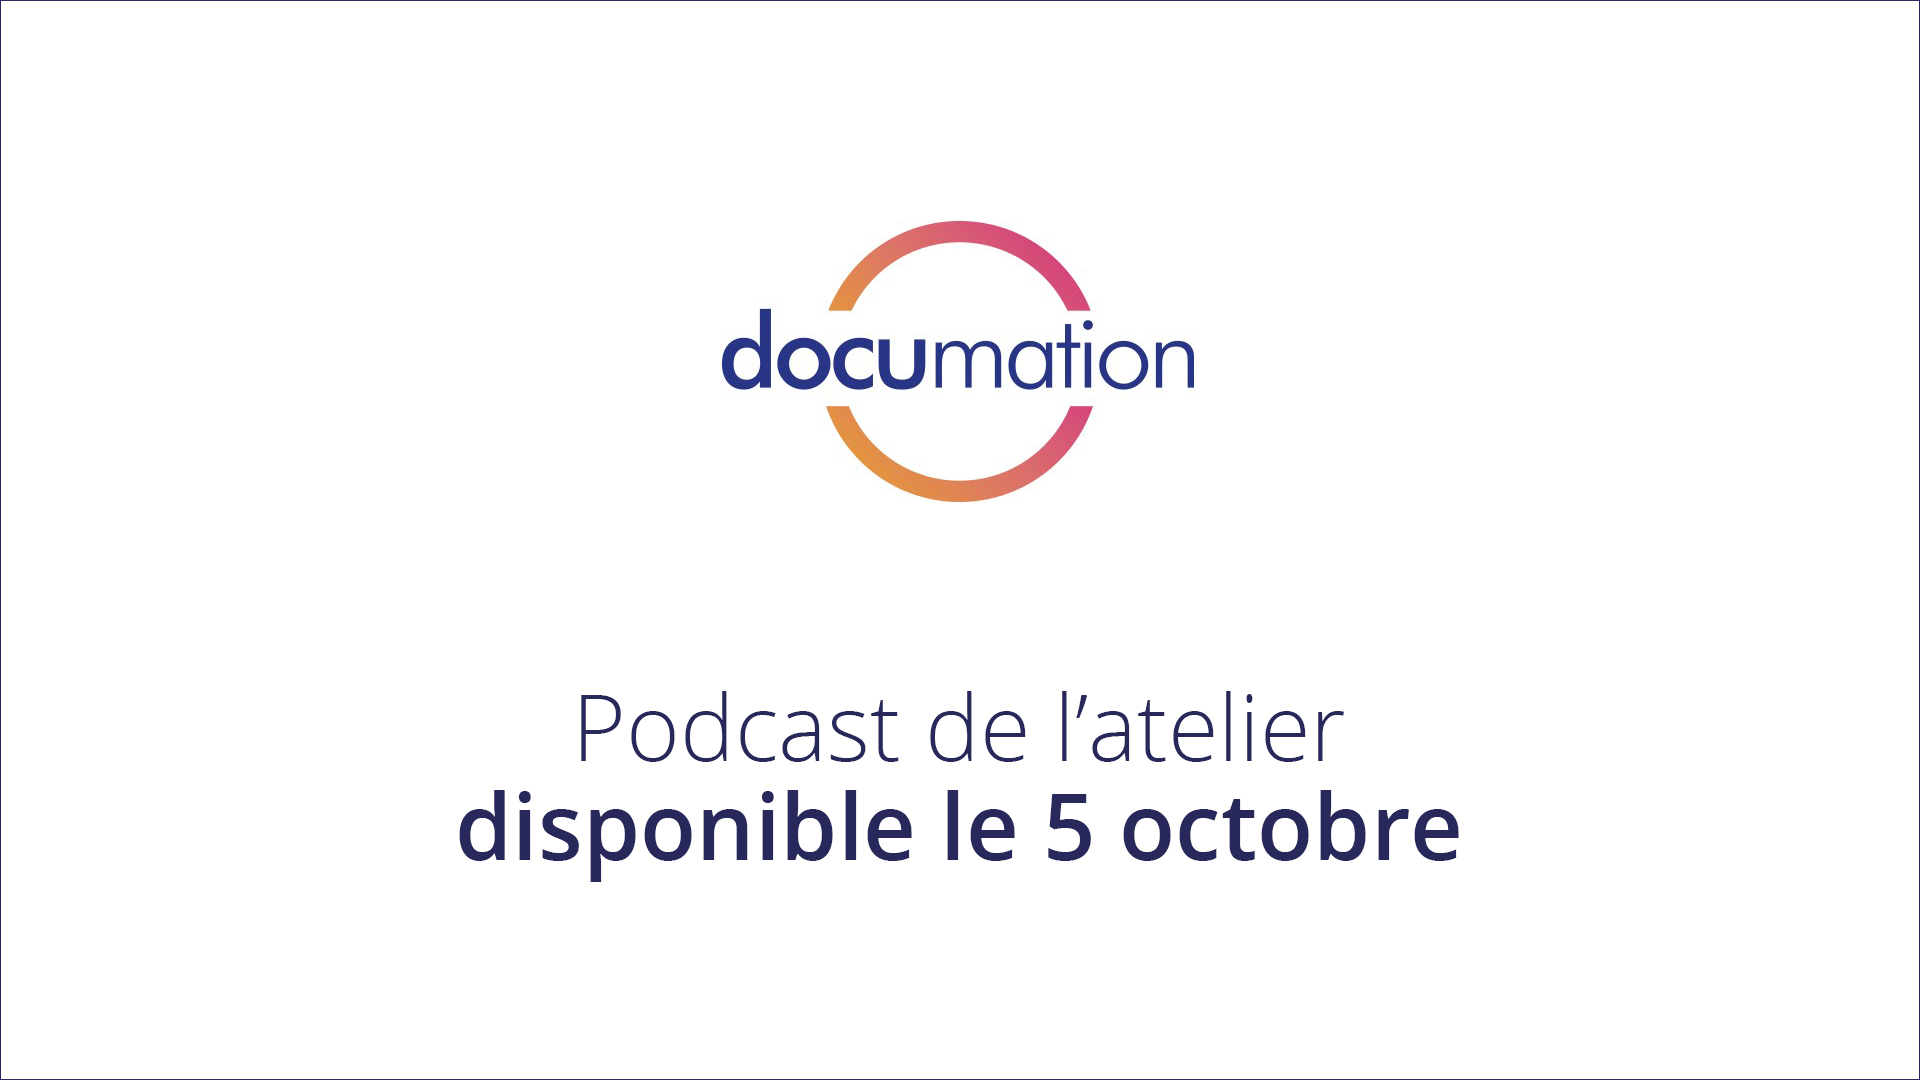 Podcasts des ateliers Documation 2020